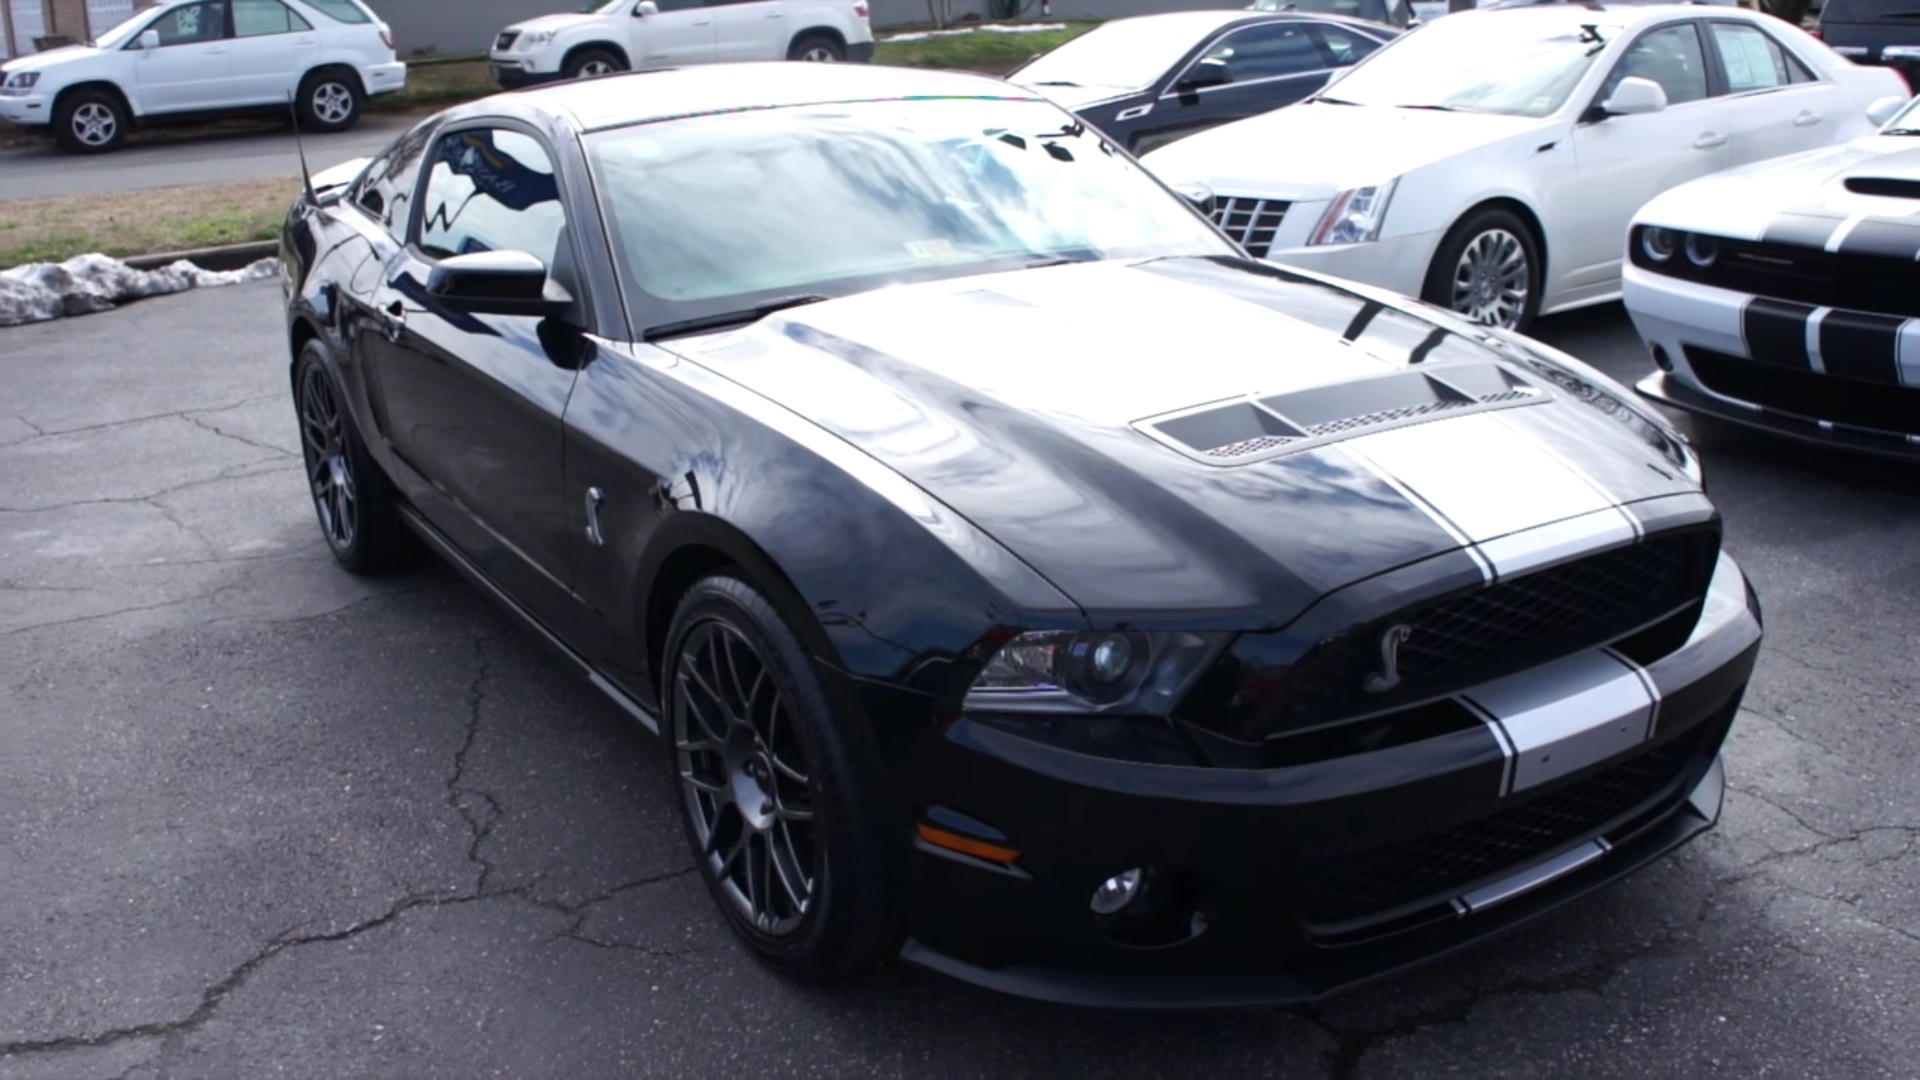 Video: 2012 Ford Mustang Shelby GT500 In-Depth Tour